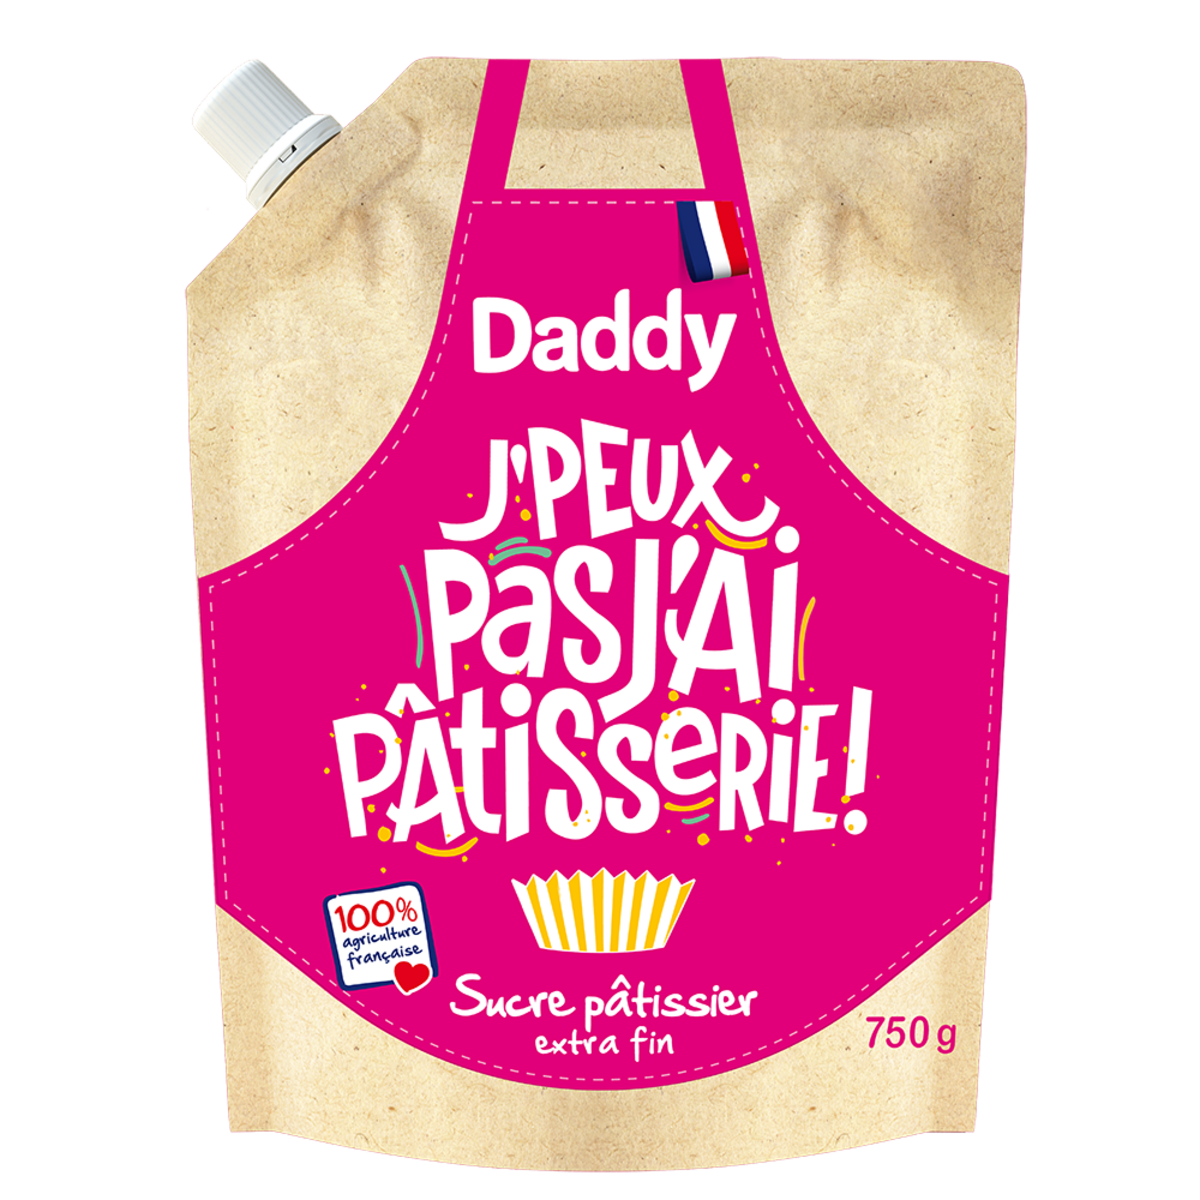 SUCRE PÂTISSIER EXTRA FIN DADDY